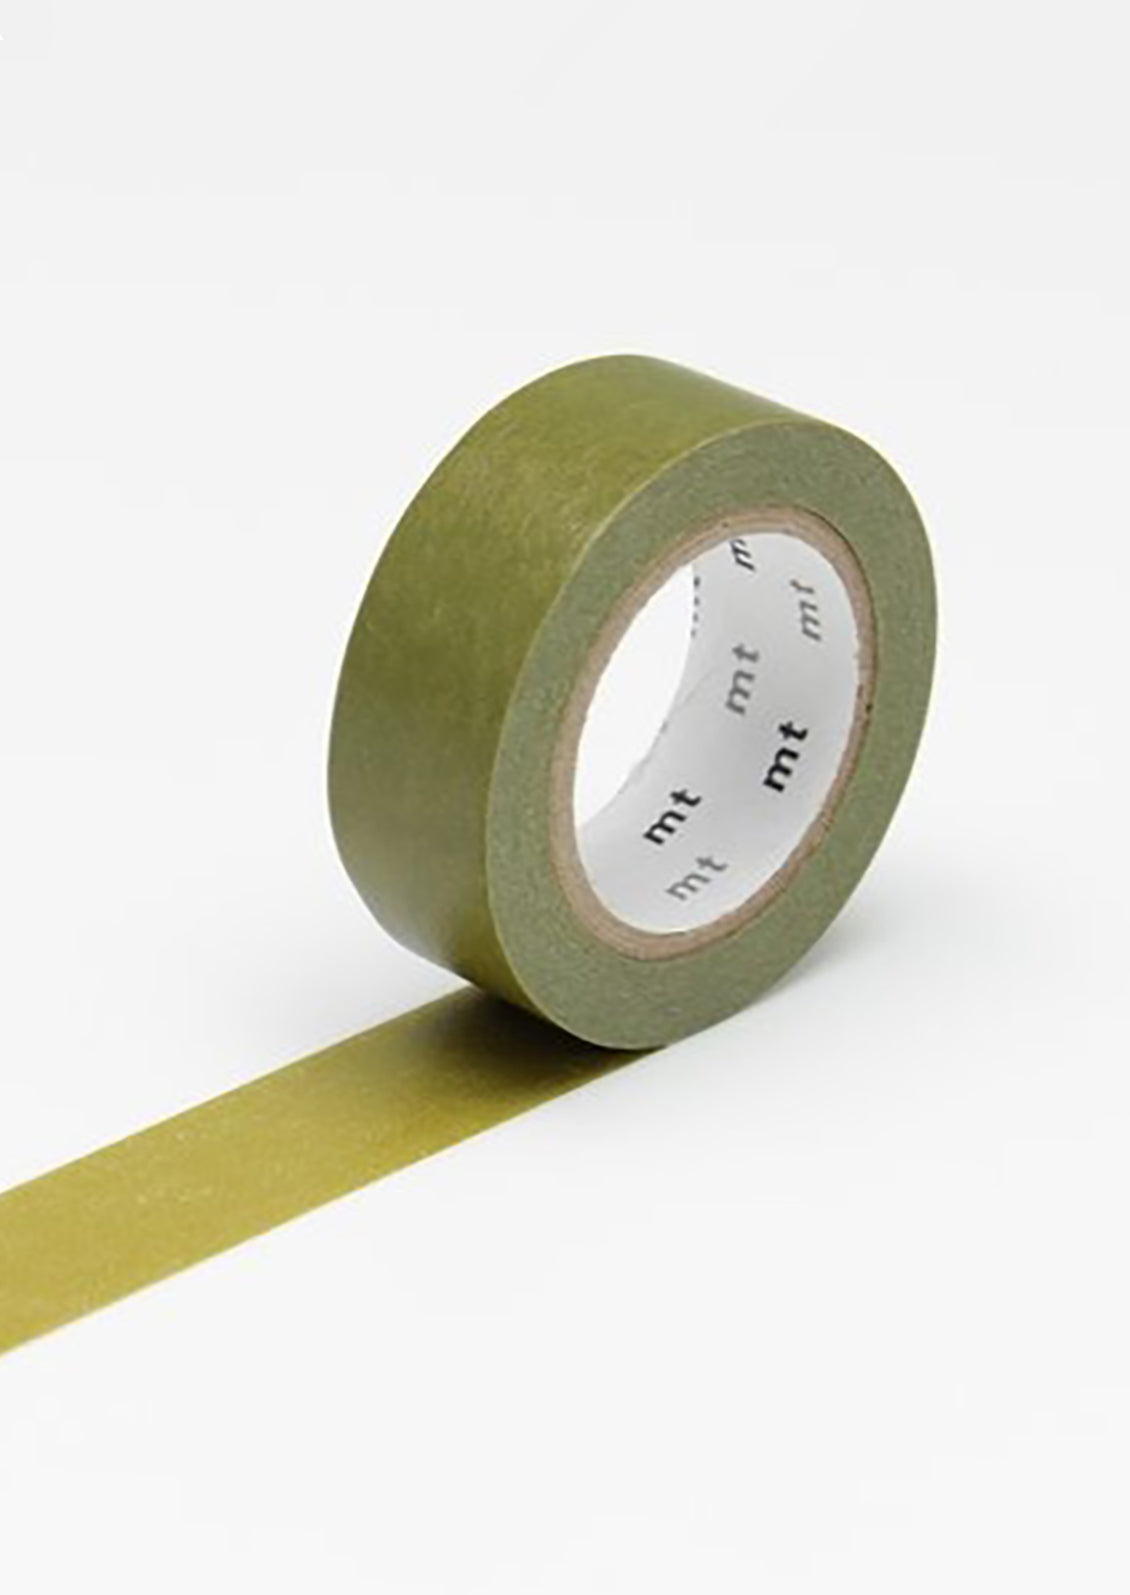 A roll of washi tape in solid olive color.